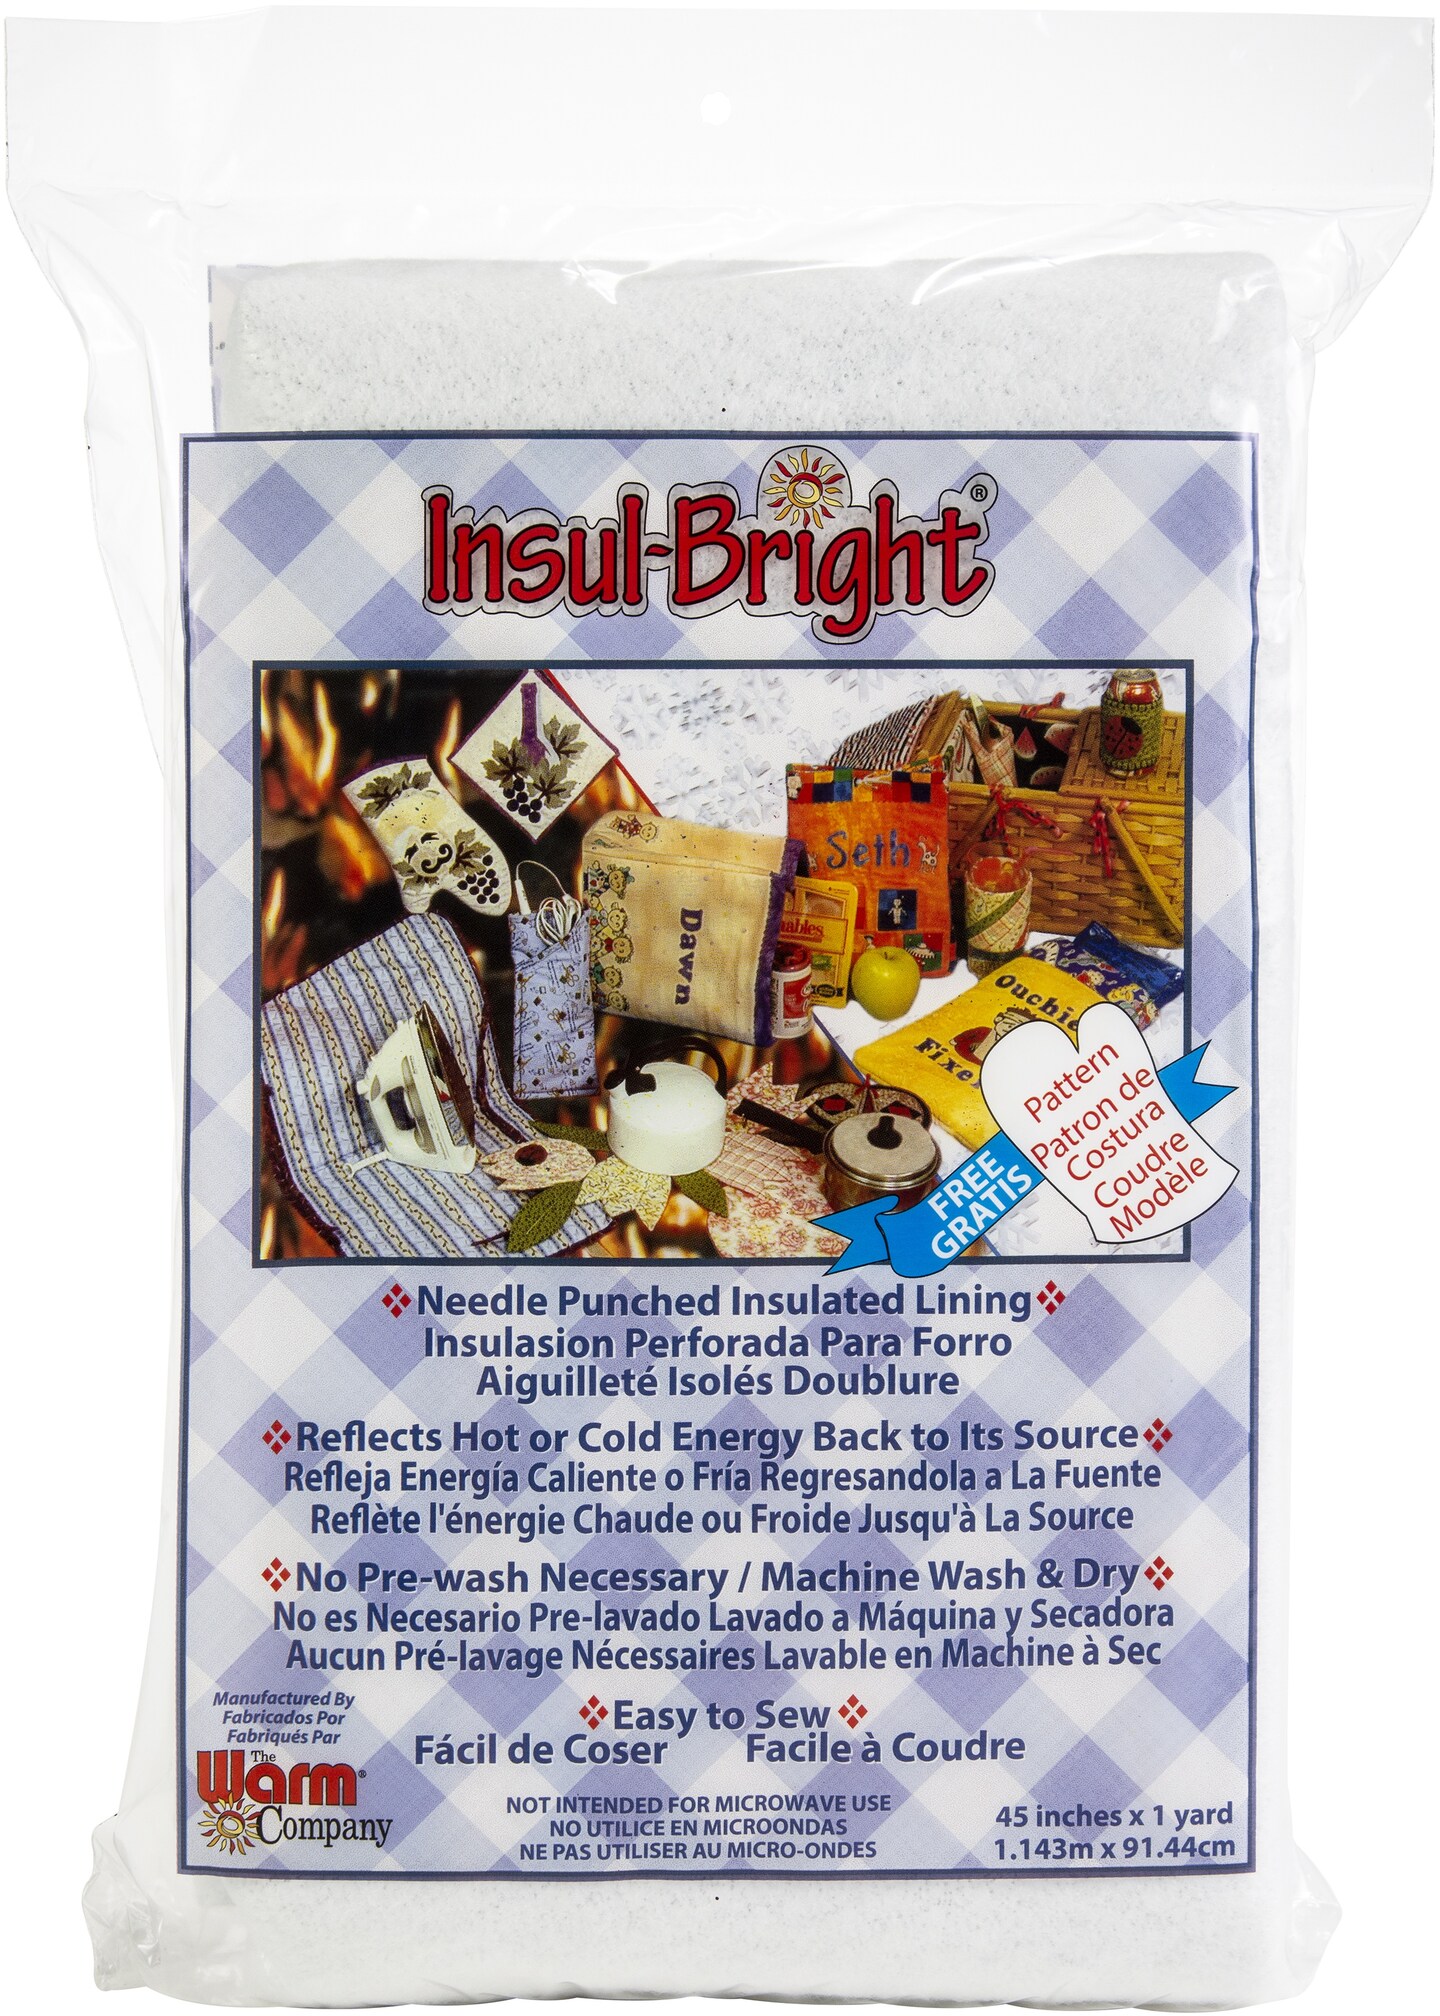 Insul-Bright Heat Resistant Batting Sold By 50cm Length The Warm Company  55cm